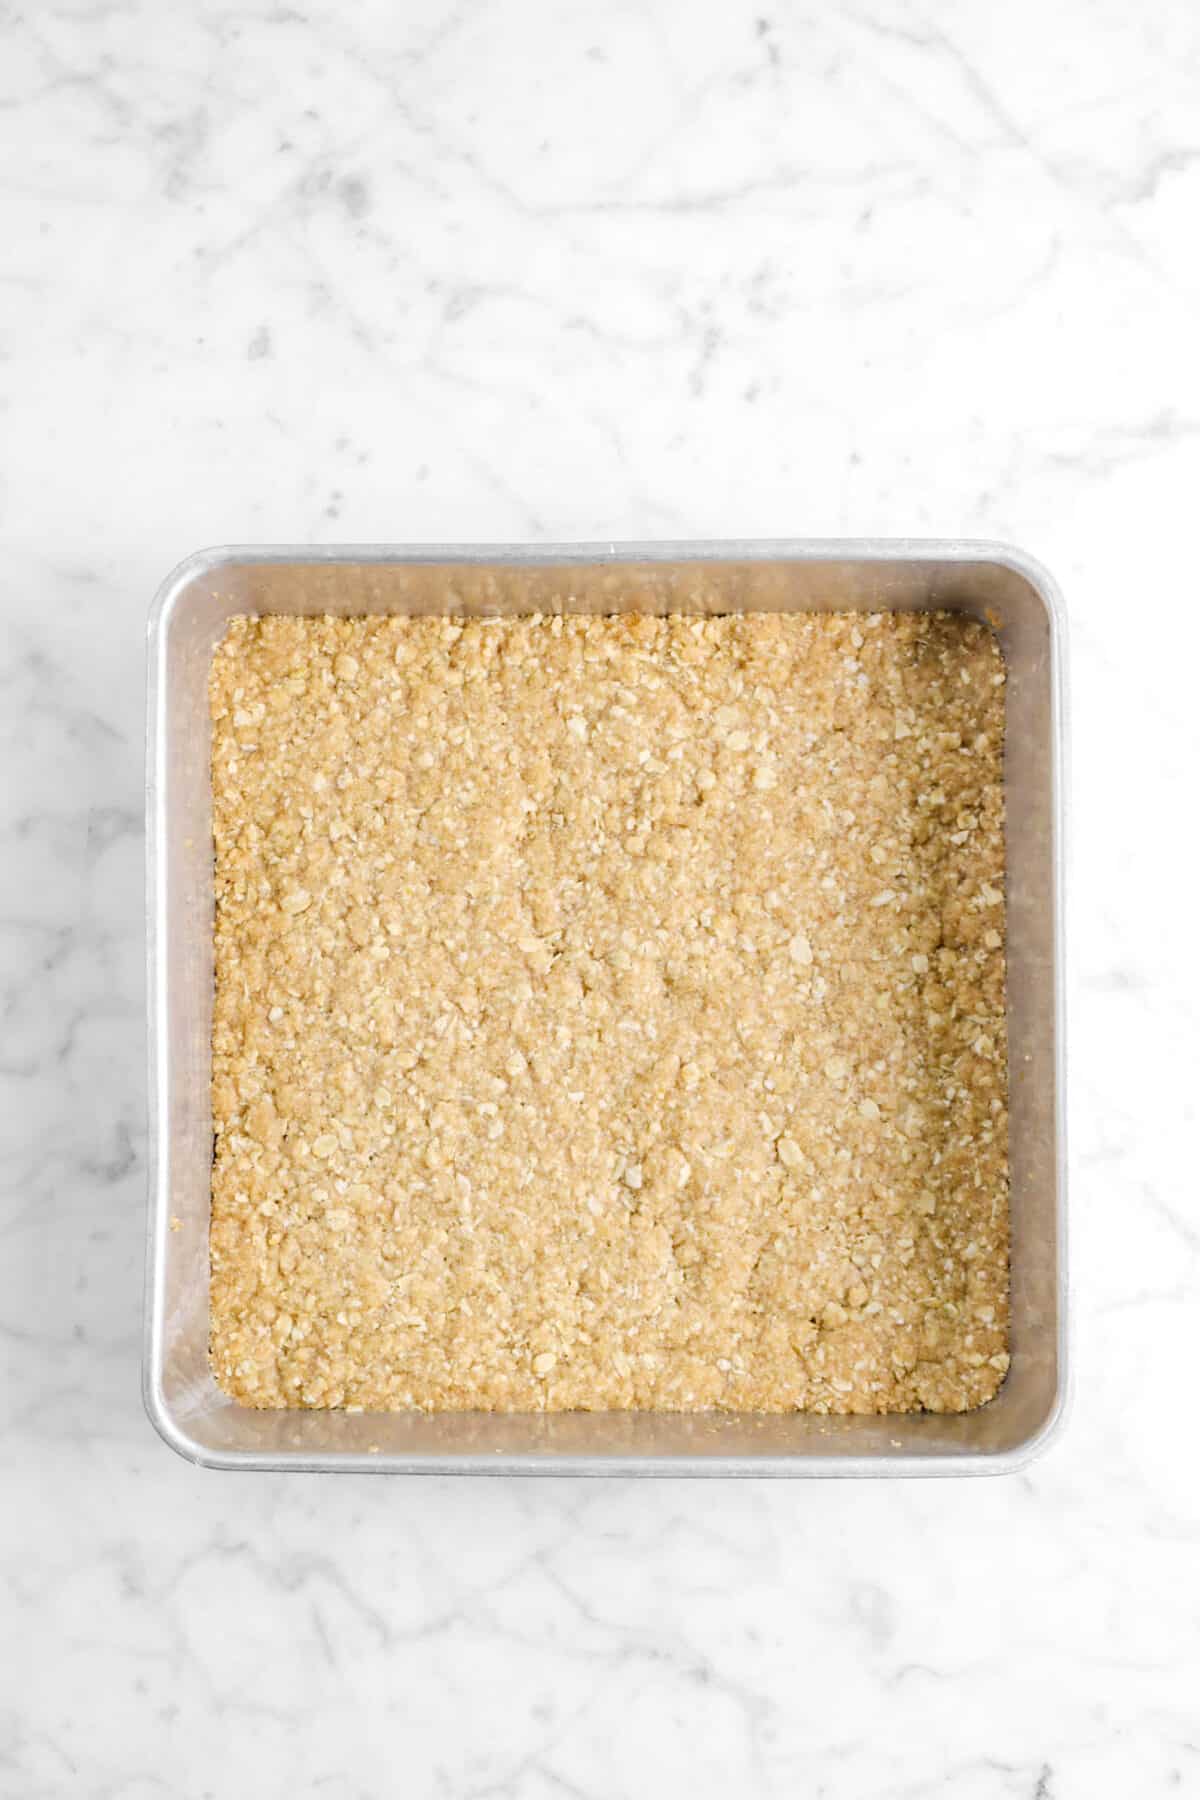 crumble bar base baked in a square pan